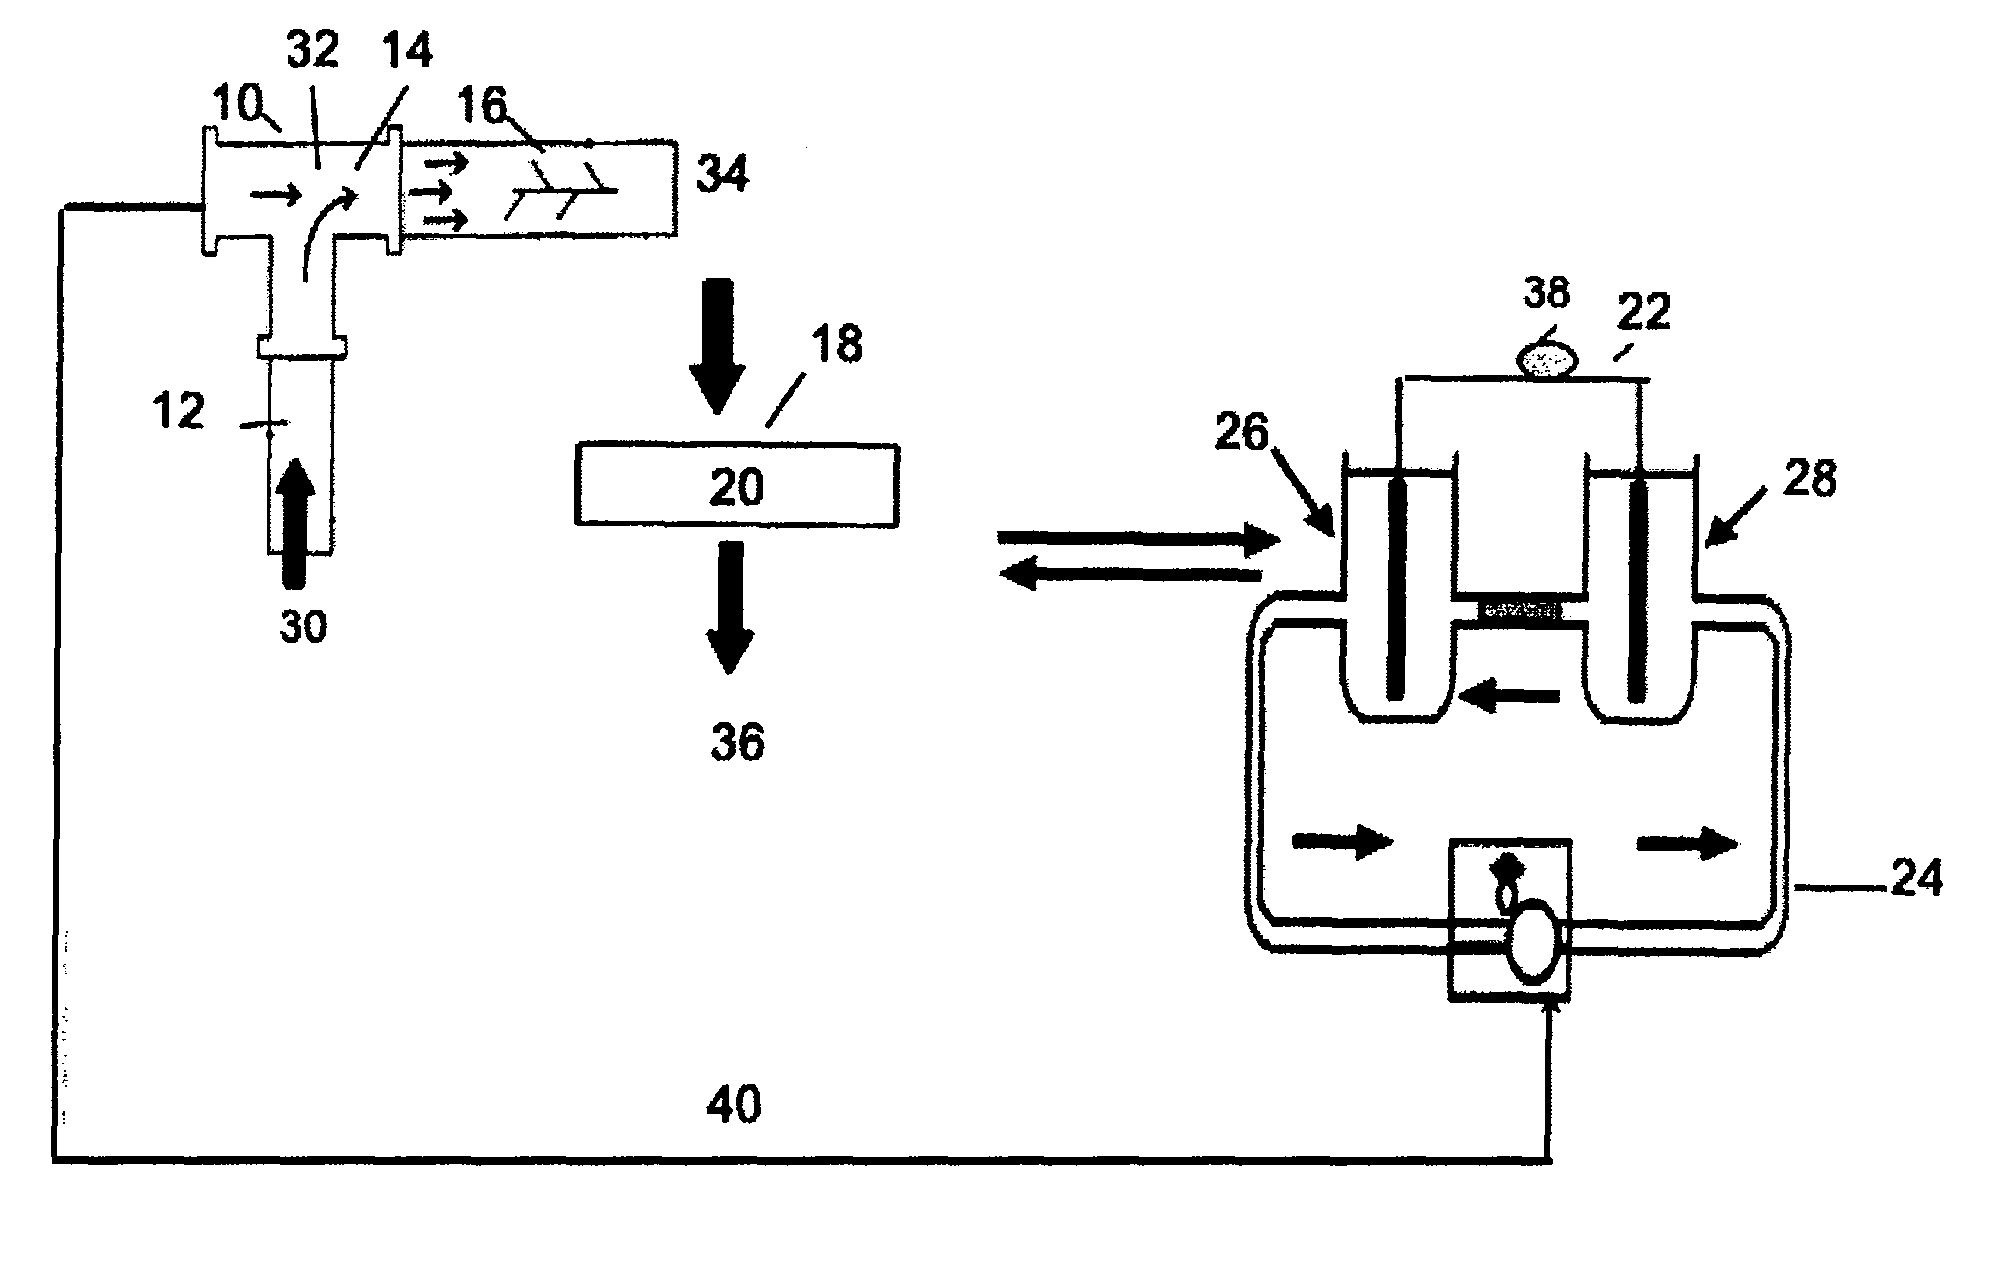 Method and system for adsorbing pollutants and/or contaminants